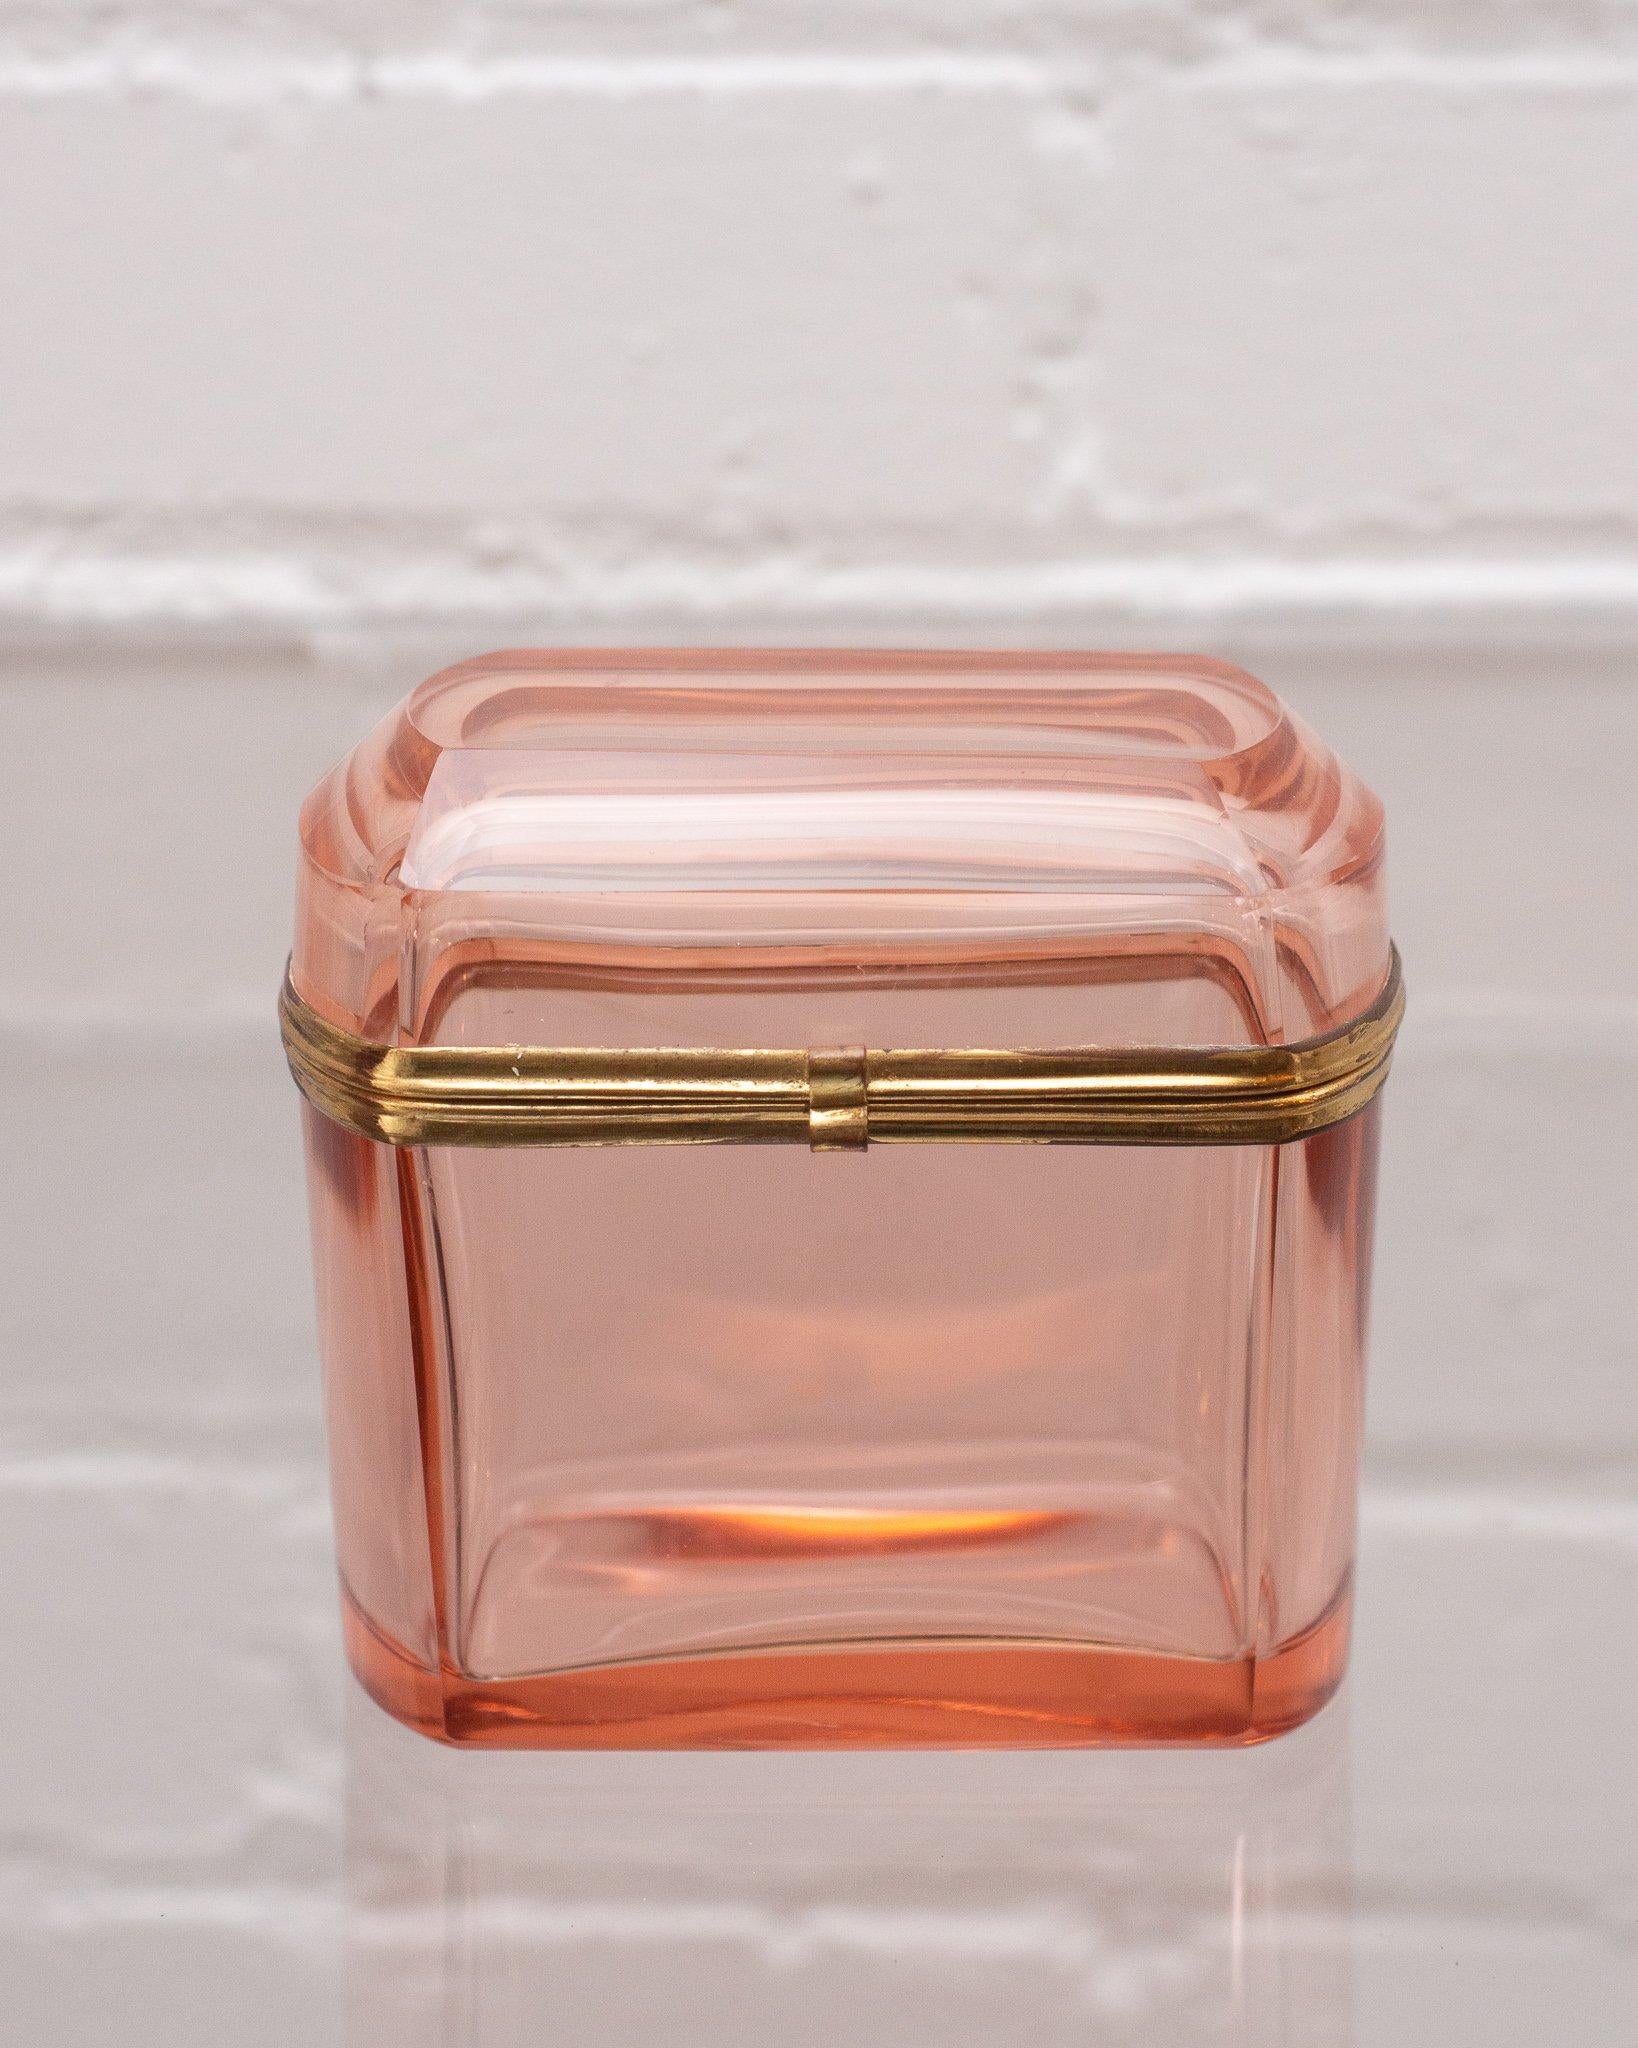 This antique French peach crystal and bronze box makes a statement in any space. An early 1900s production, this piece transitions from modern to Classic interiors seamlessly with its sophisticated shape and light catching quality.